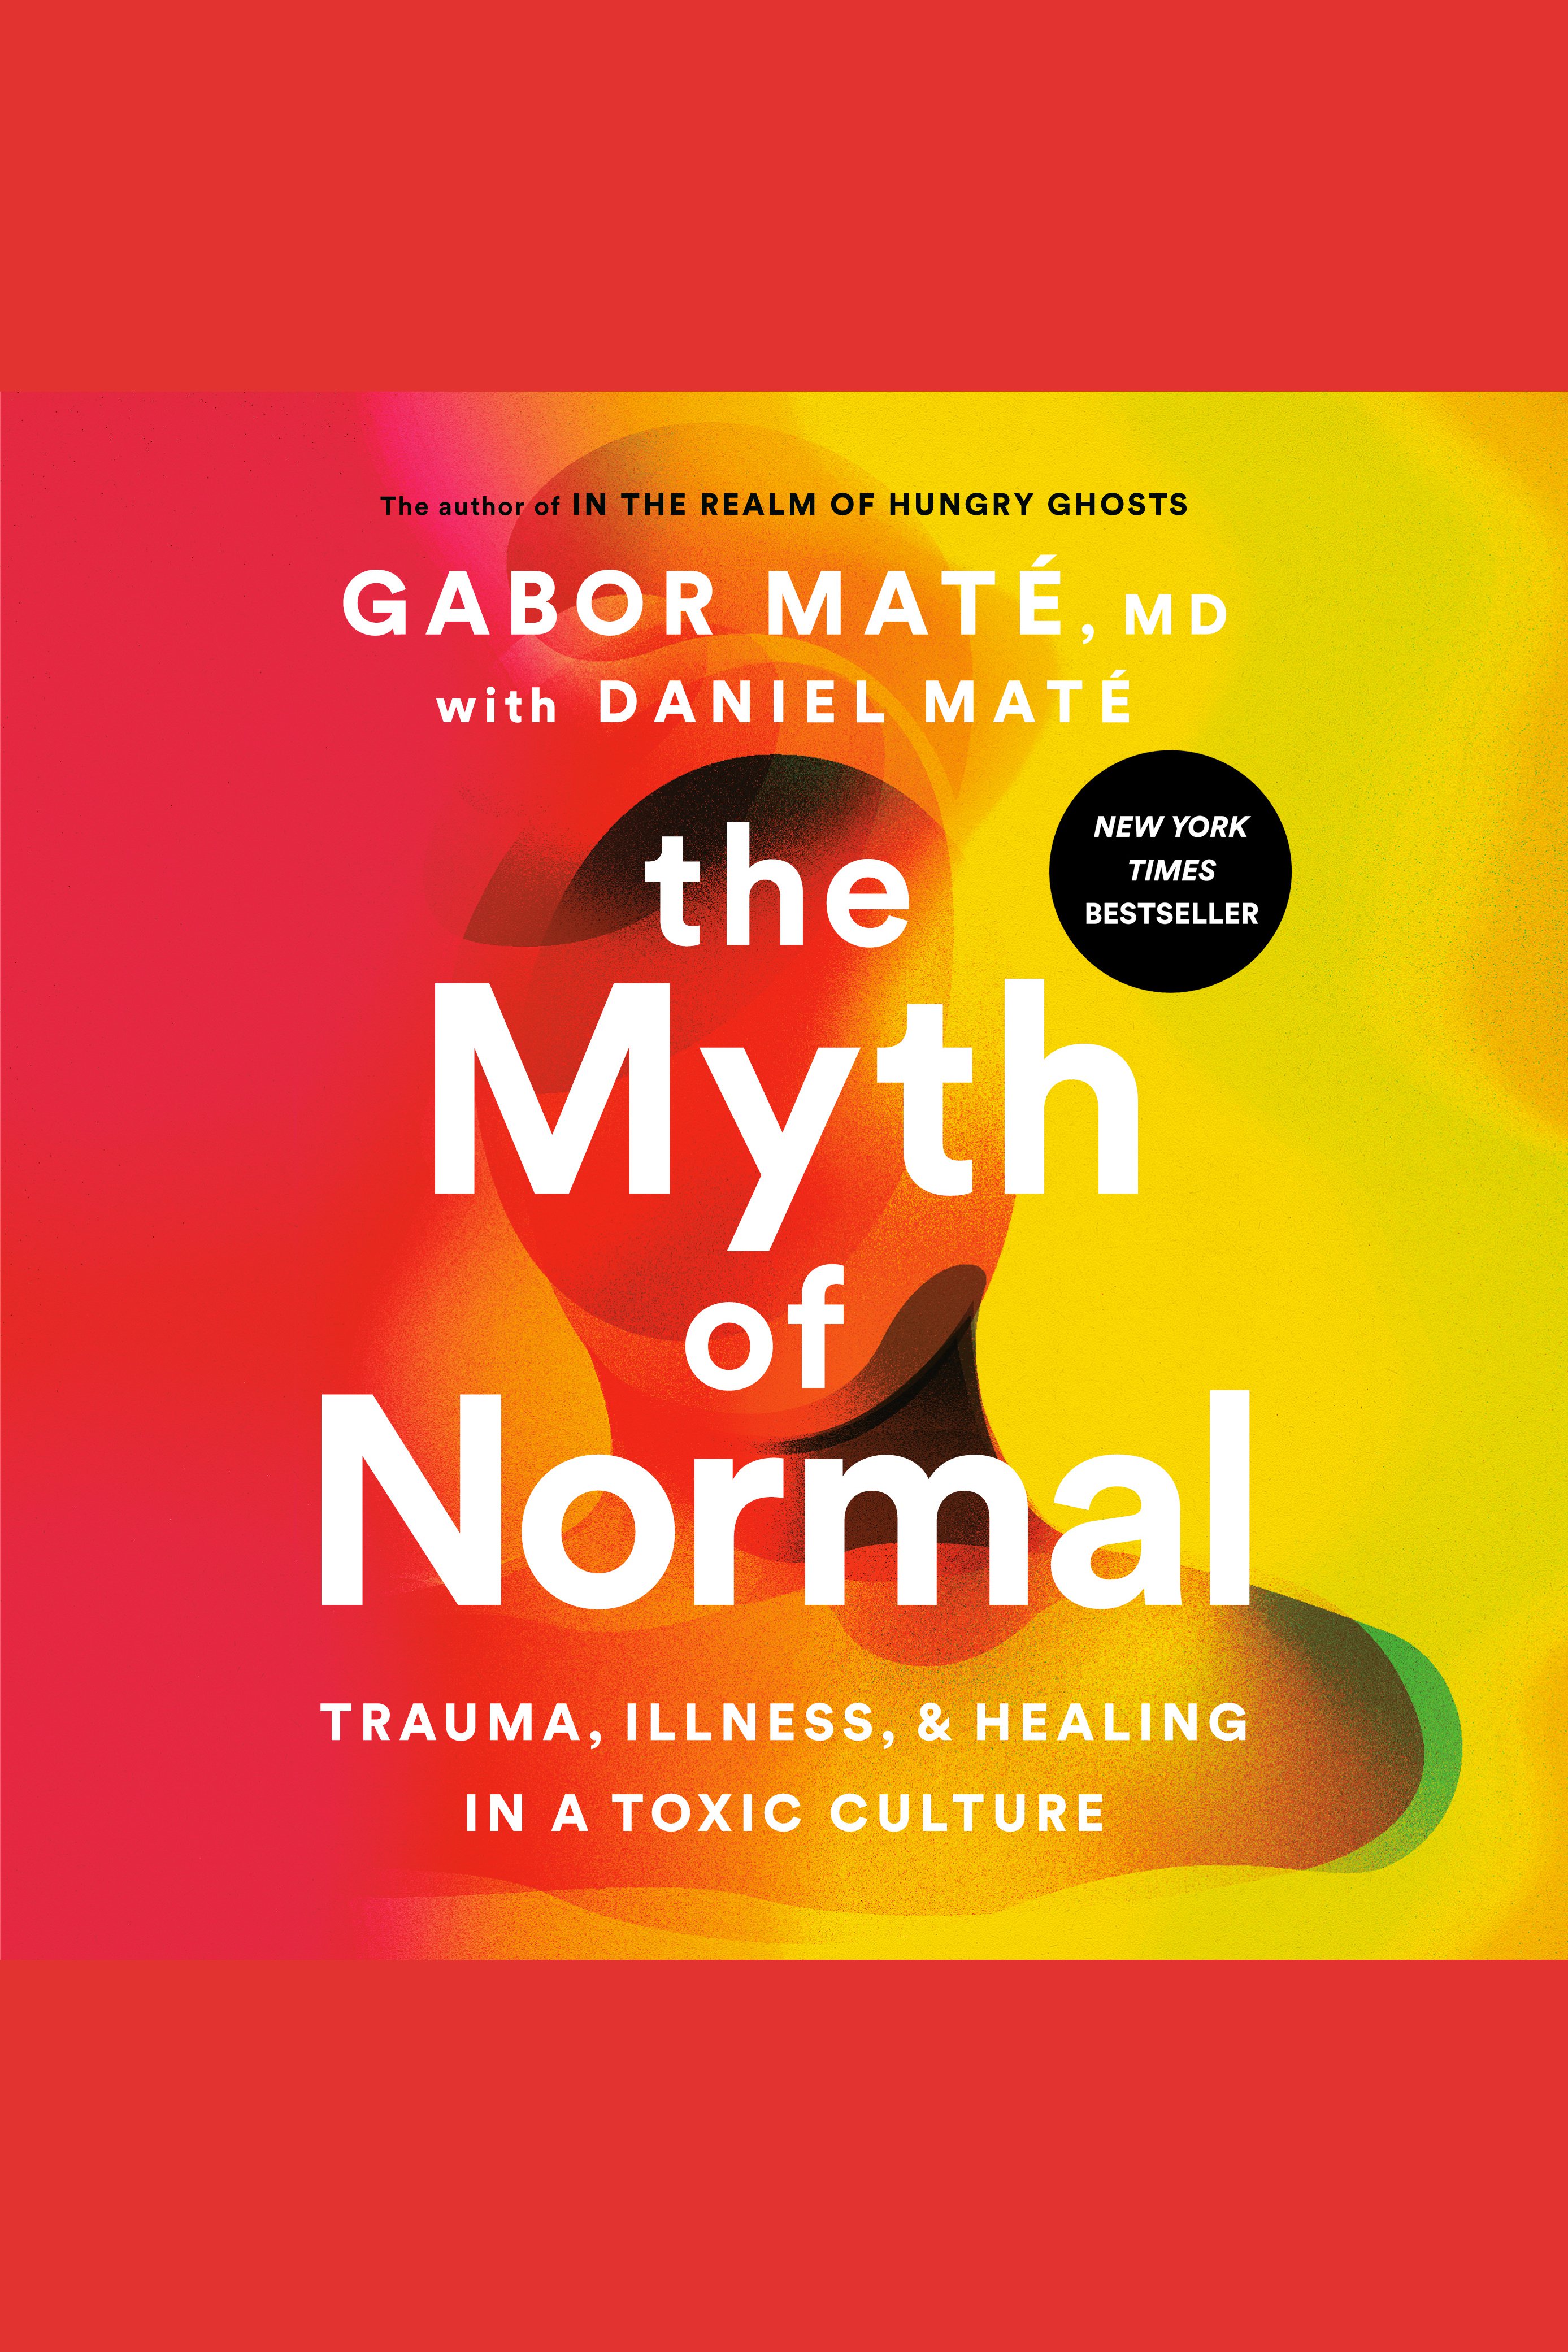 The Myth of Normal Trauma, Illness, and Healing in a Toxic Culture